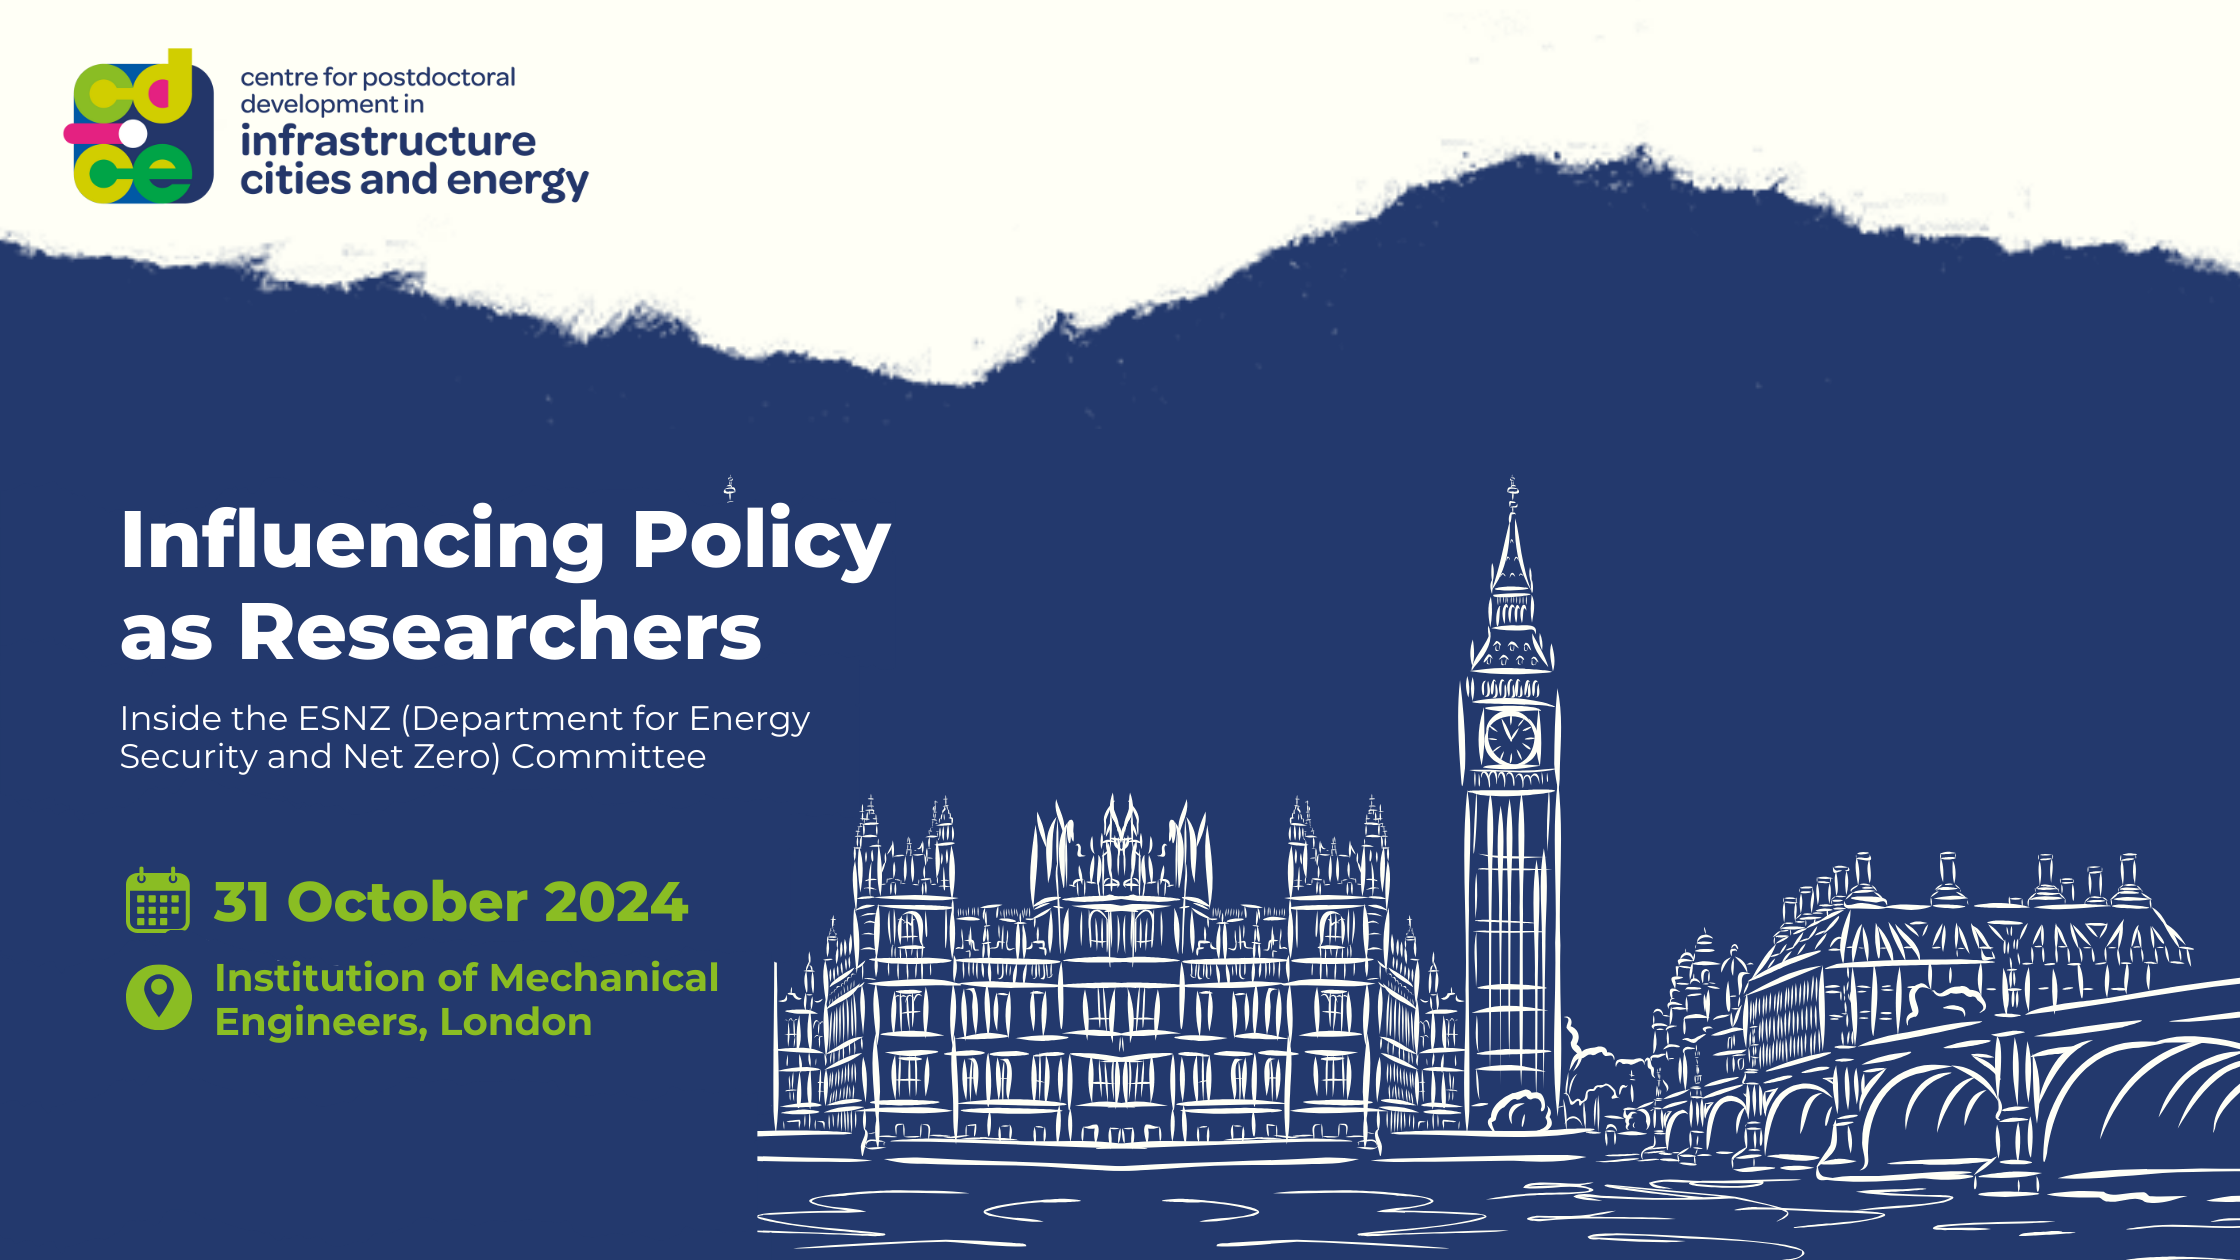 Influencing Policy as Researchers, 31 October 2024